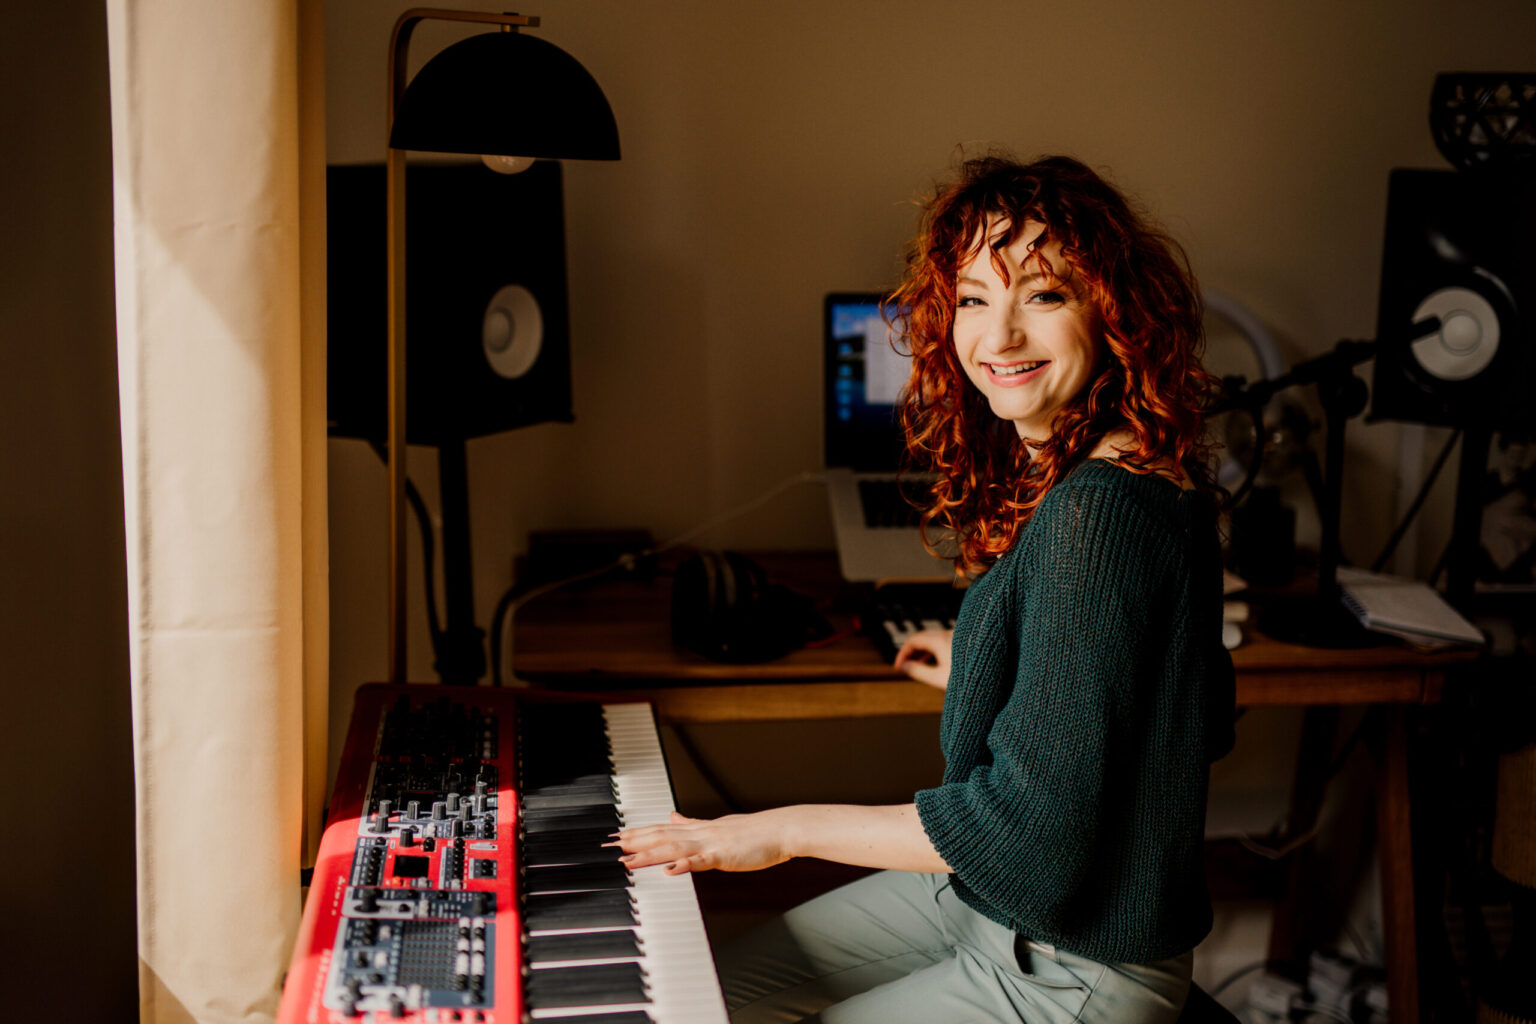 Redheaded singer and vocal coach smiling to the camera while being in her voice studio; with a red piano and monitors.